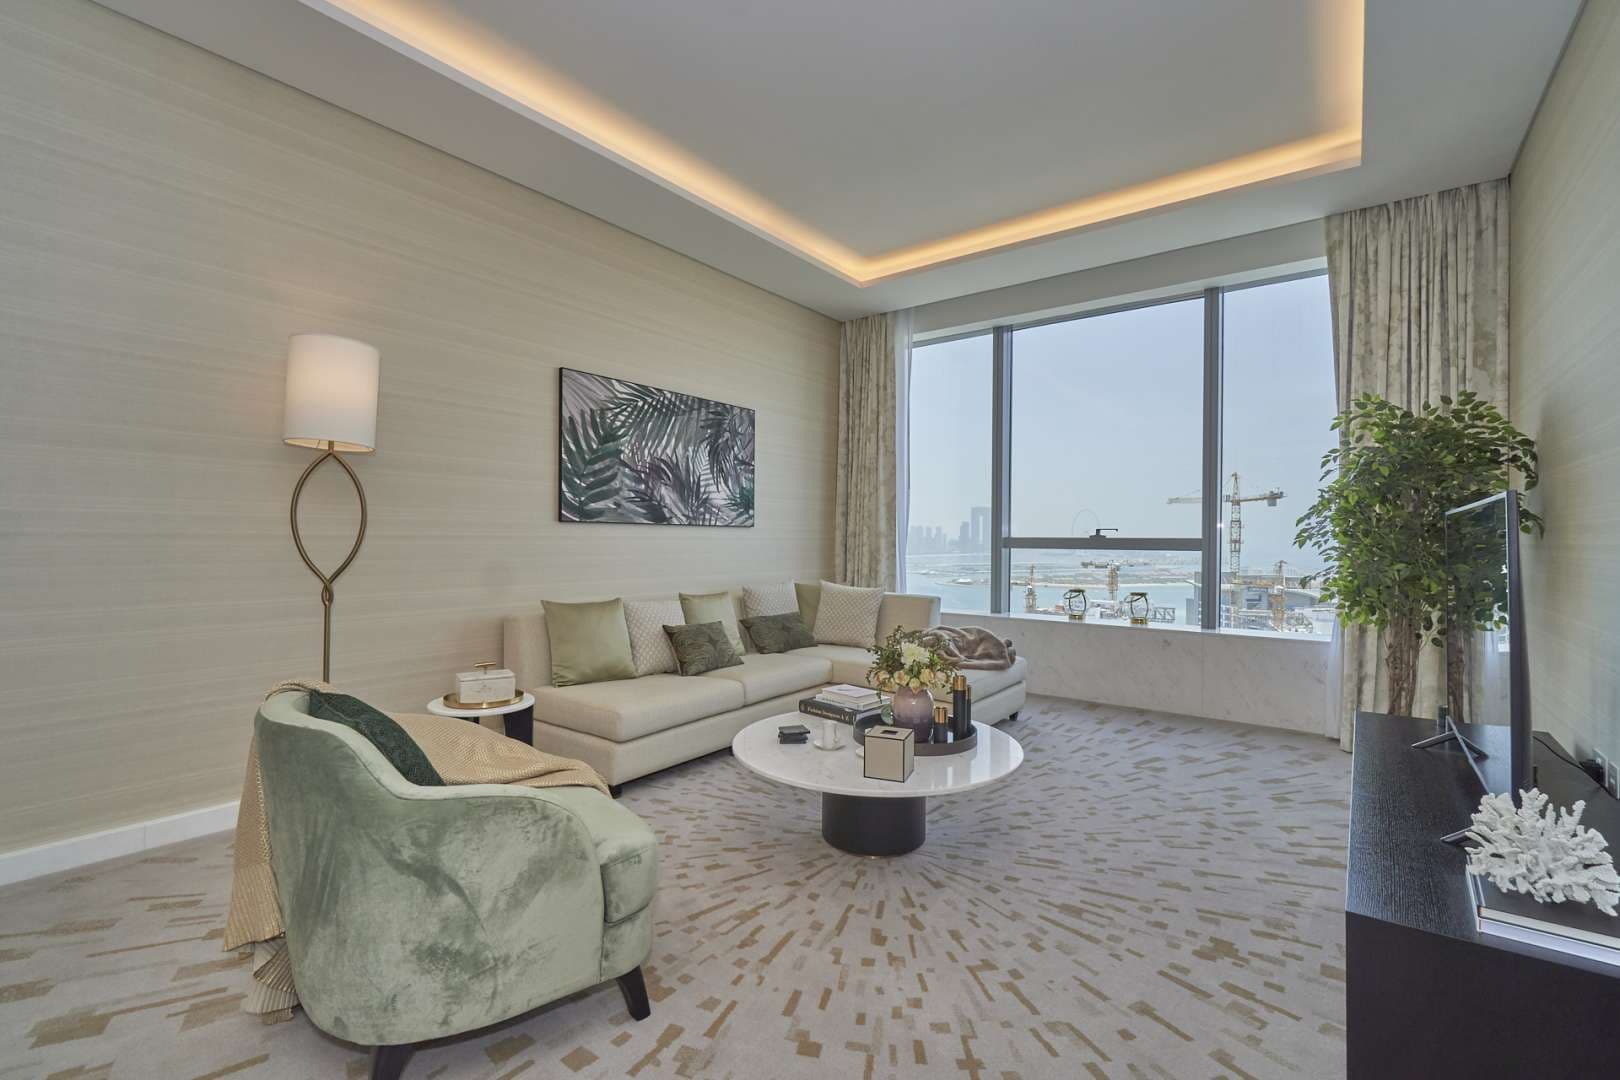 1 Bedroom Apartment For Sale The Palm Tower Lp07258 2c3831519cebb600.jpg